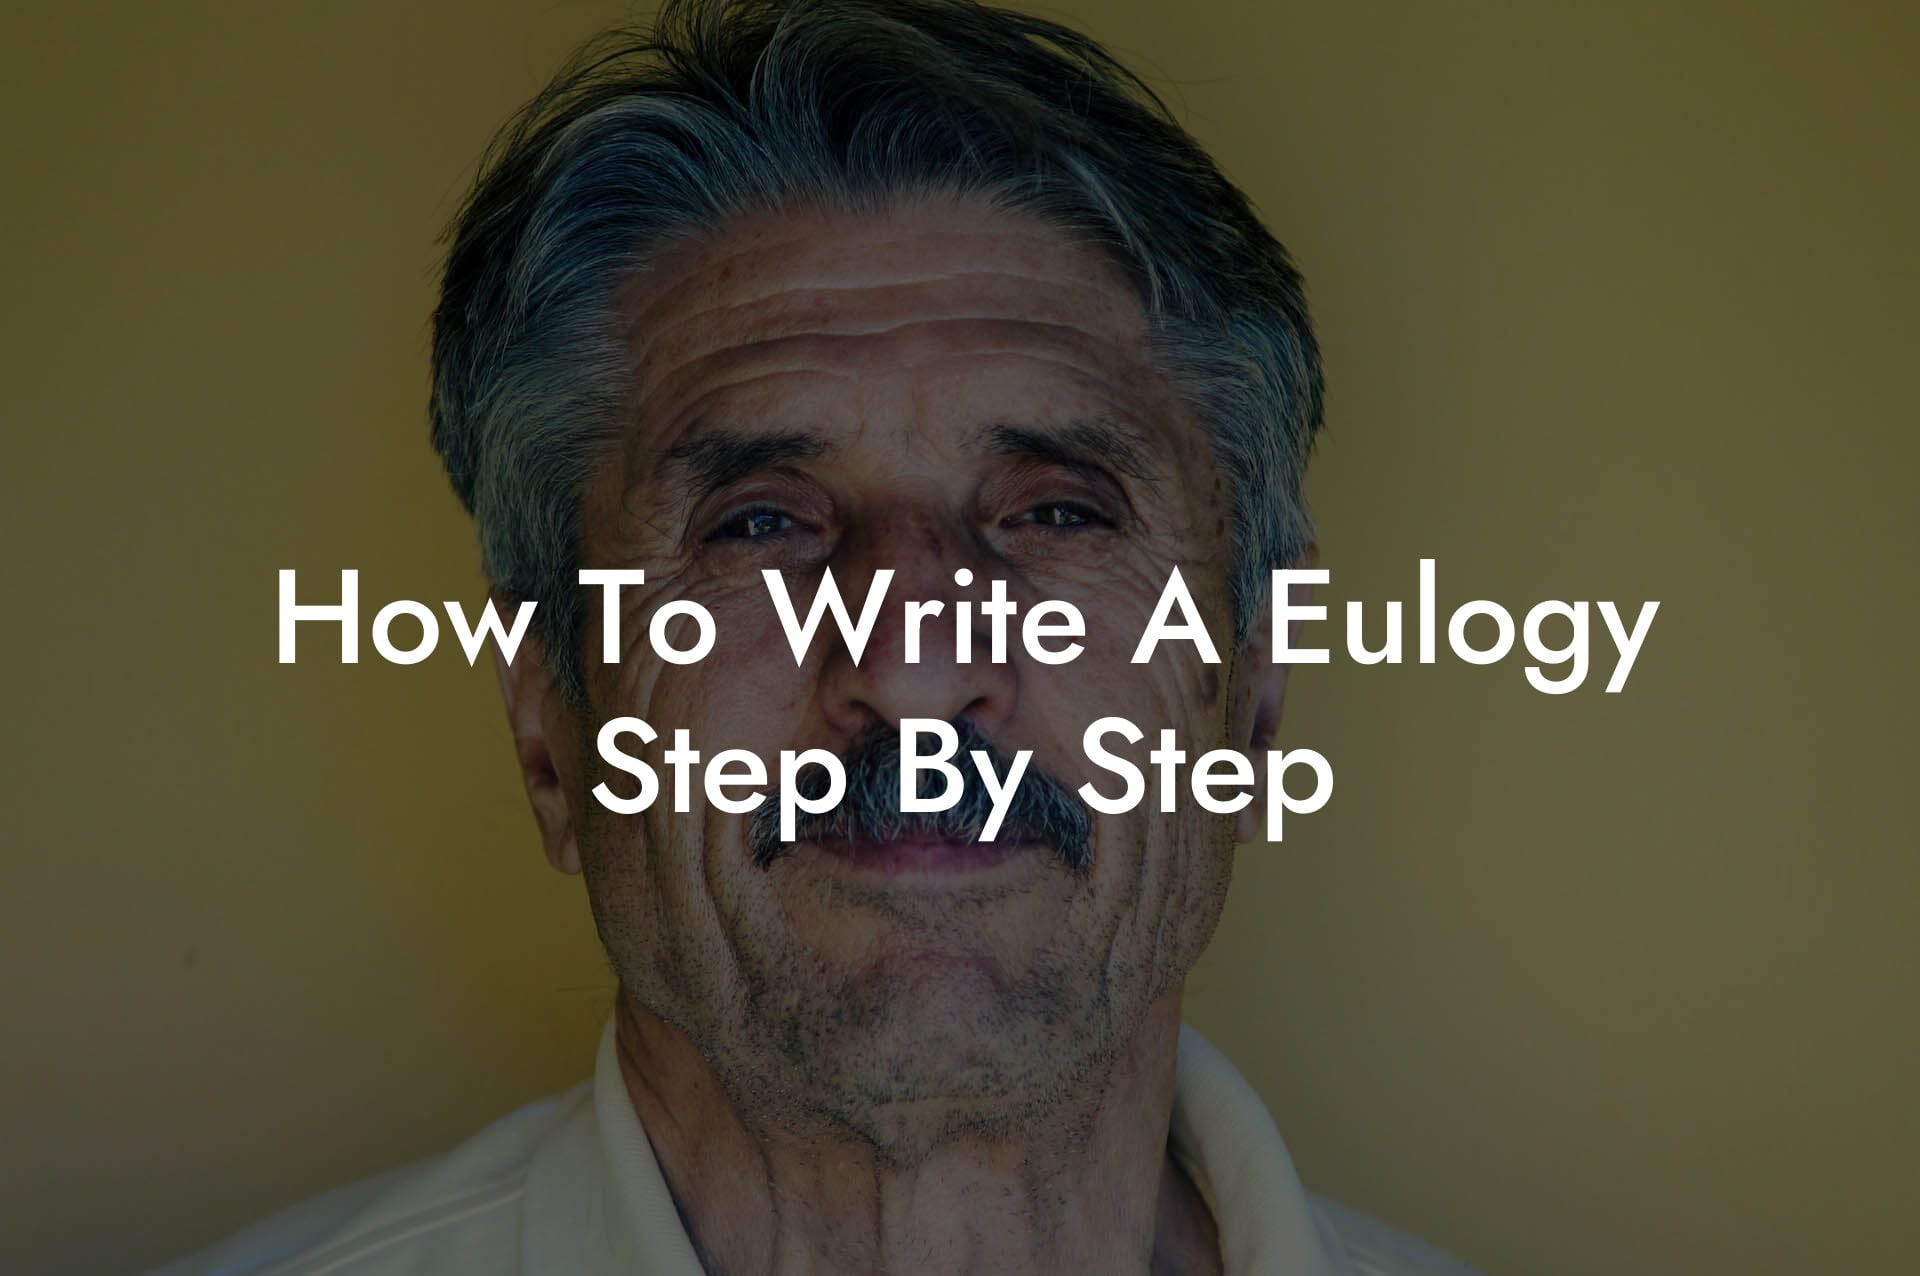 How To Write A Eulogy Step By Step